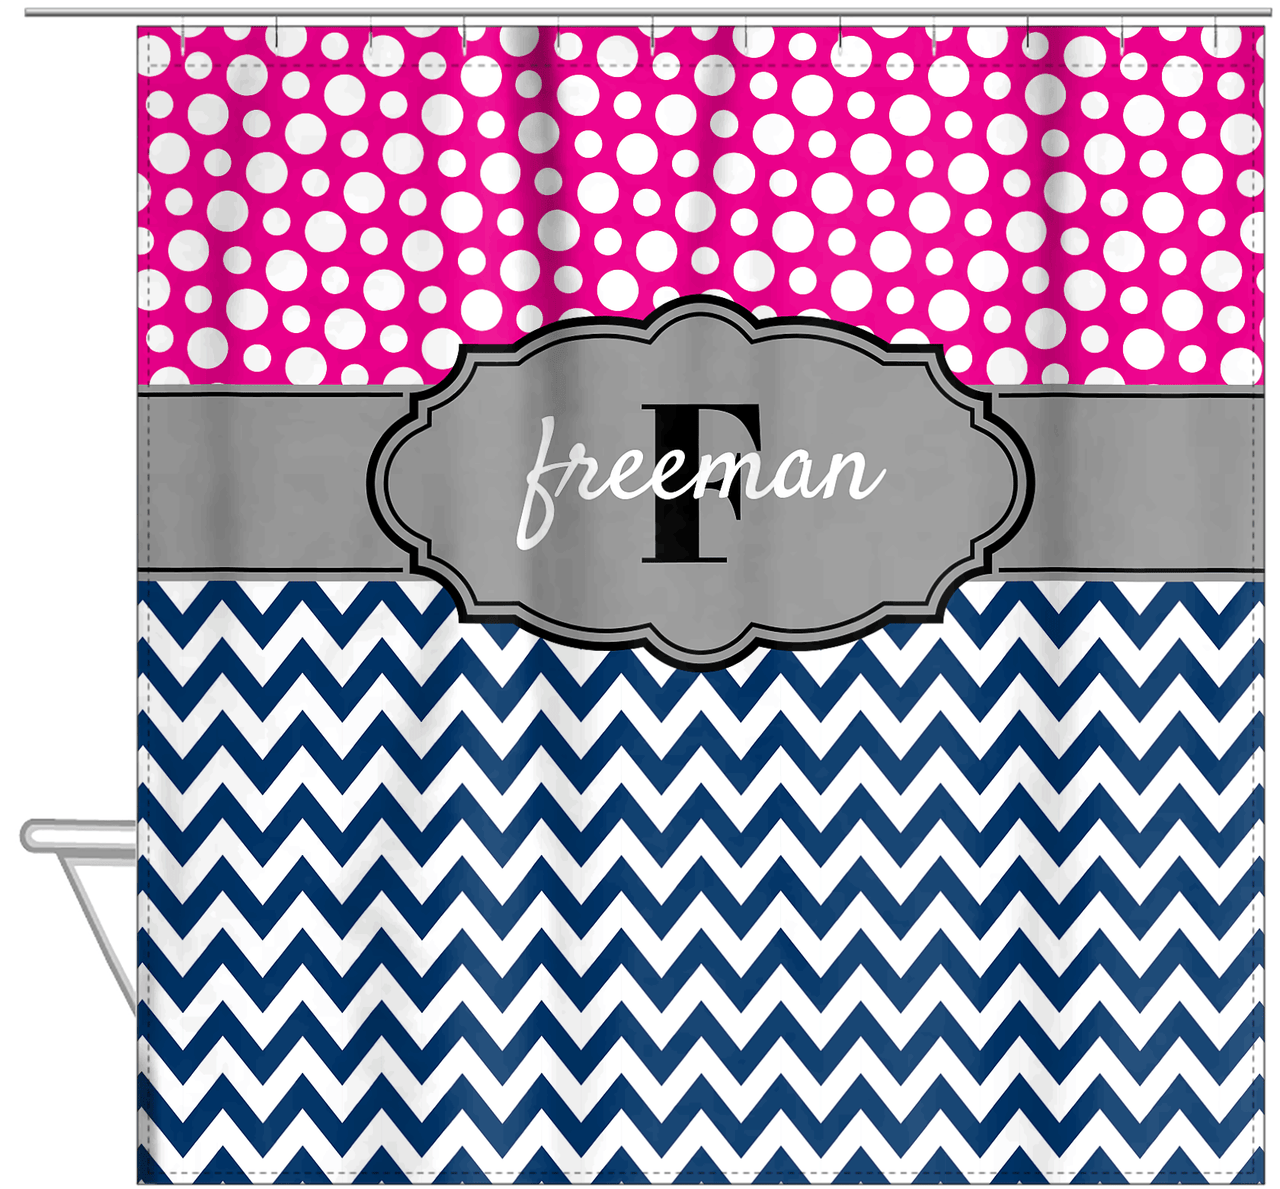 Personalized Polka Dots and Chevron I Shower Curtain - Pink and Navy - Fancy Nameplate II - Hanging View